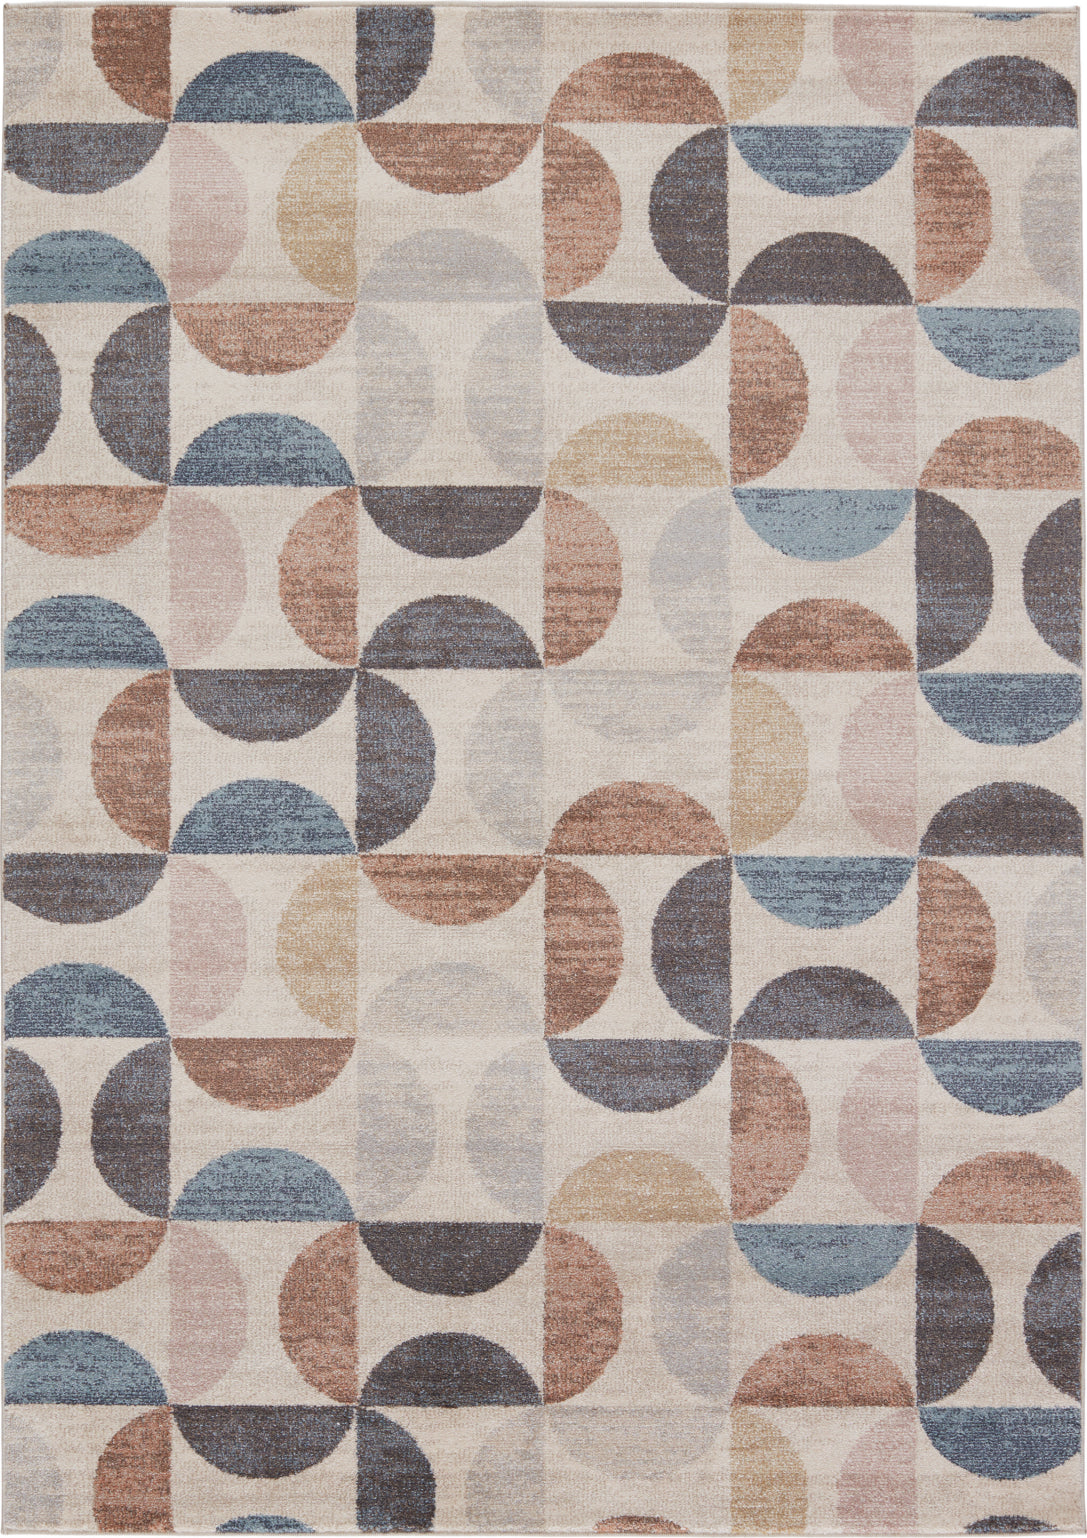 Jaipur Living Abrielle Marcelo ABL13 Cream/Multicolor Area Rug by Vibe Main Image